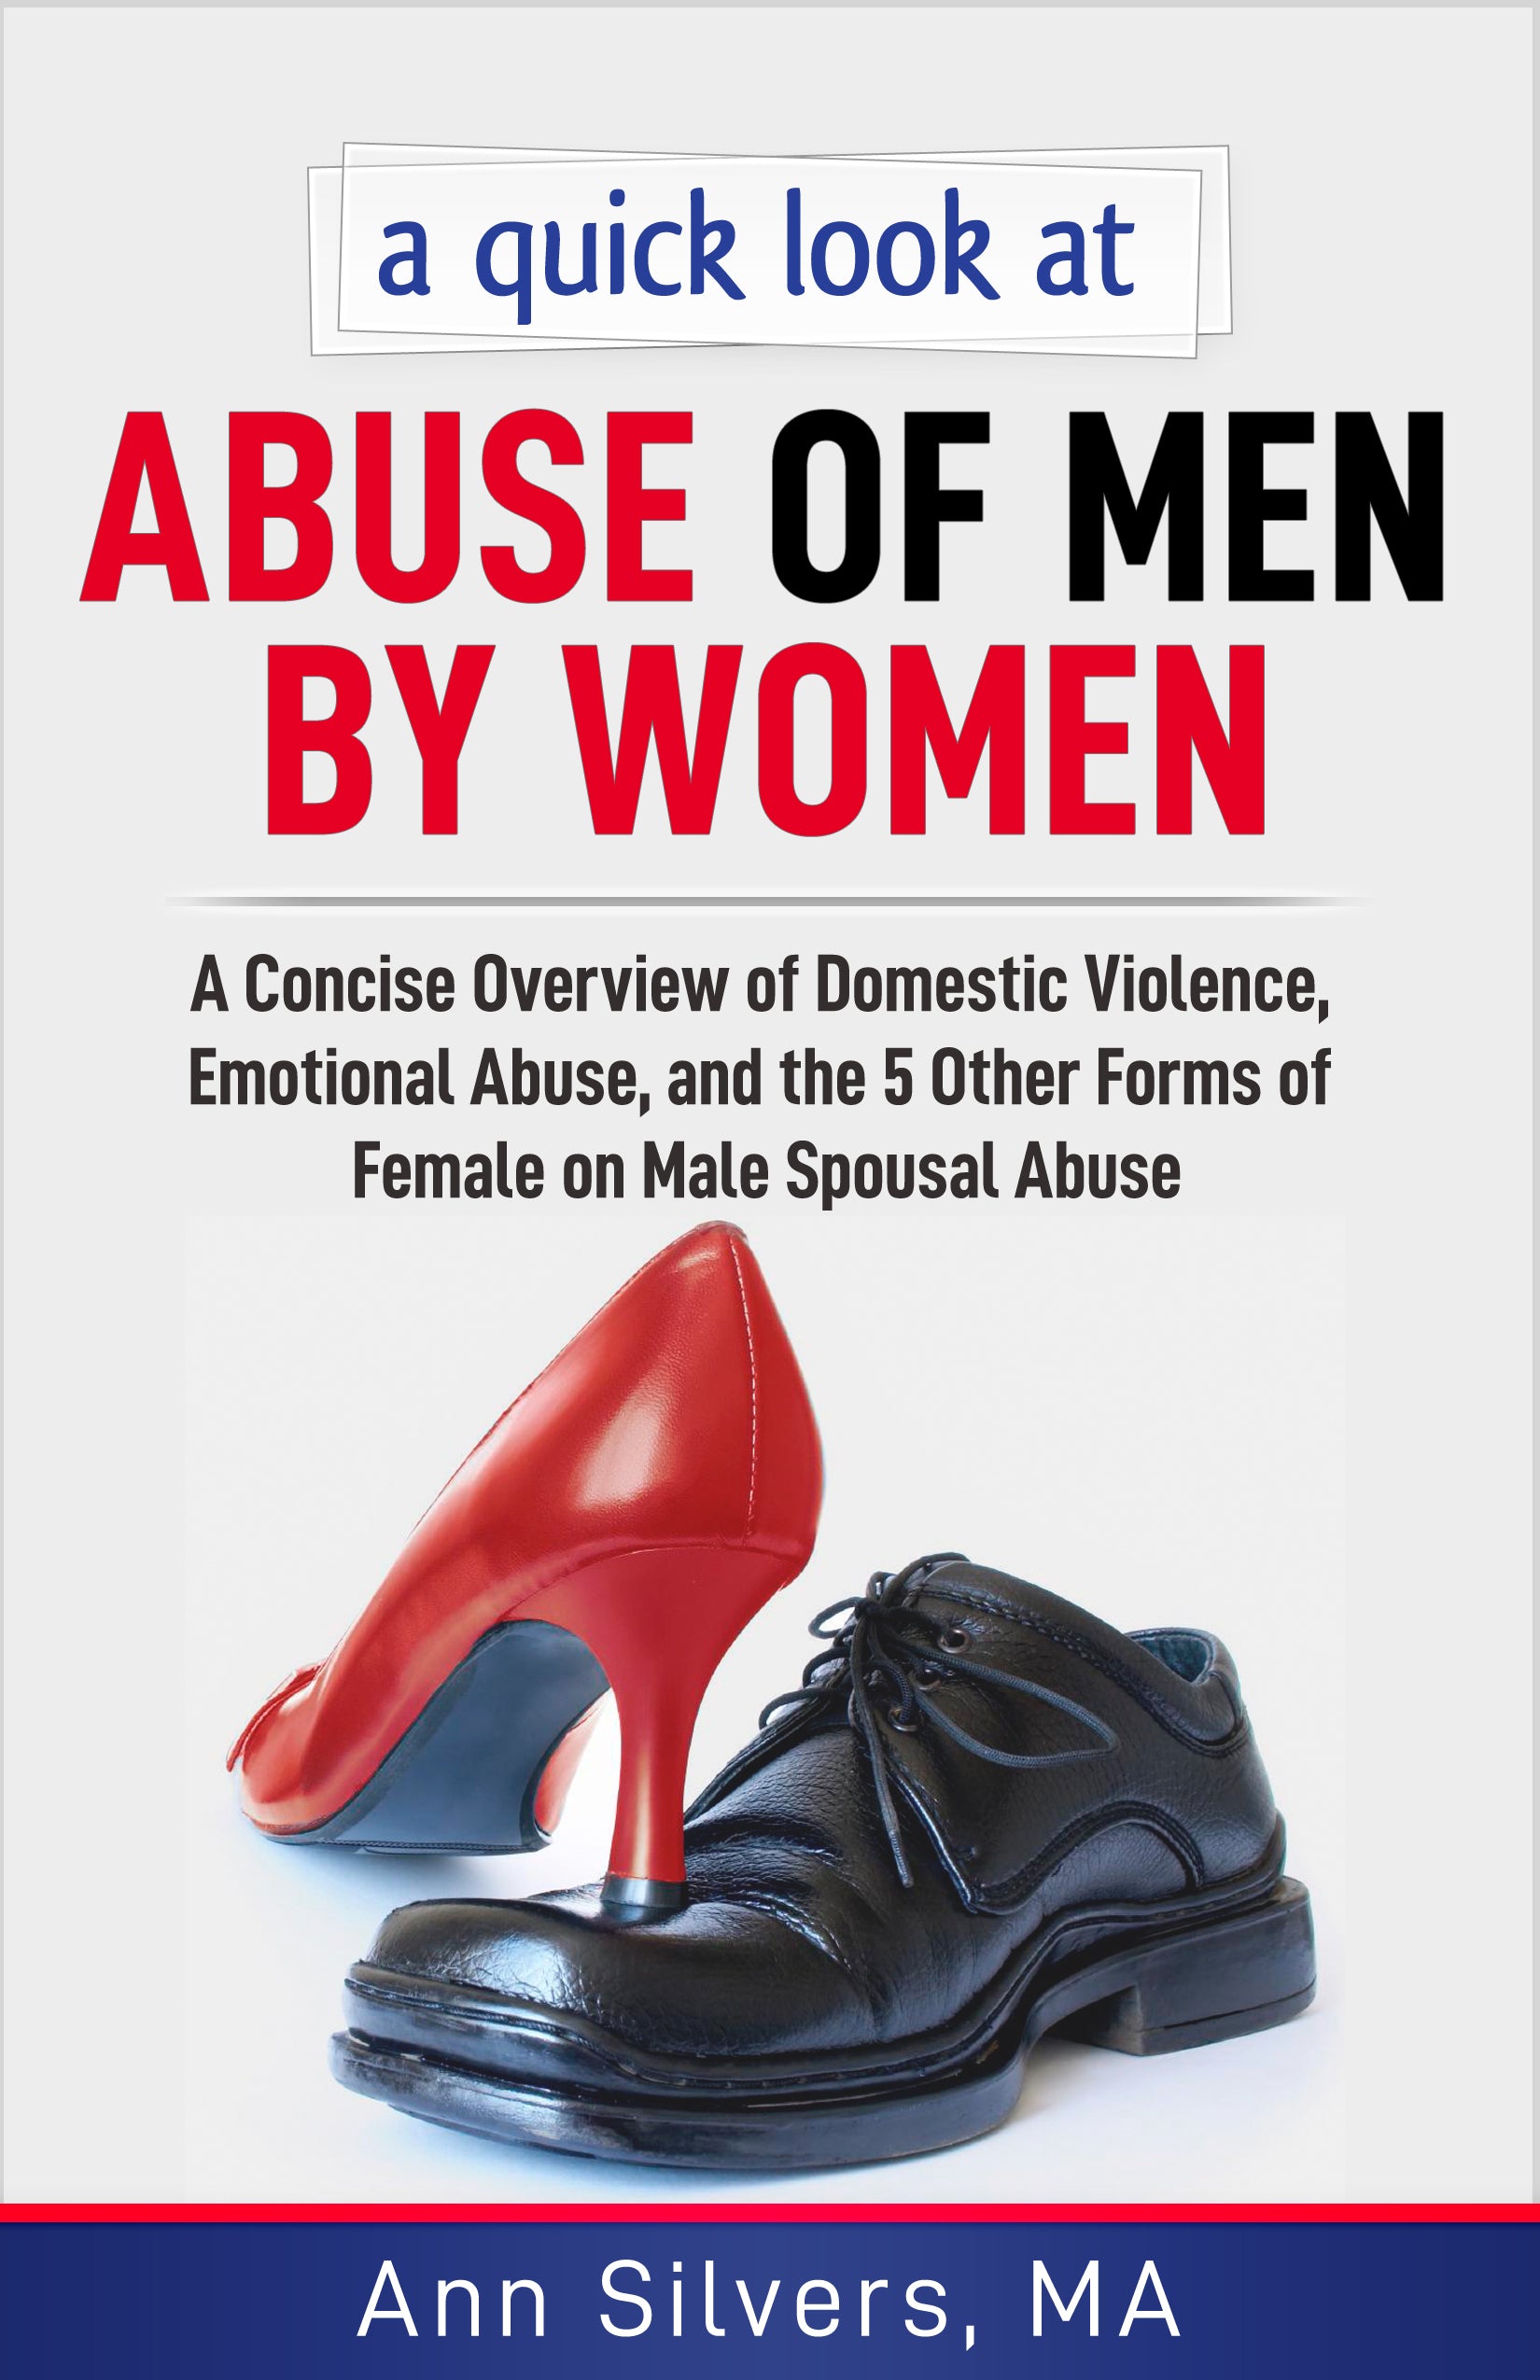 A quick look at Abuse OF Men BY Women: A Concise Overview of Domestic Violence, Emotional Abuse, and the 5 Other Forms of Female on Male Spousal Abuse 